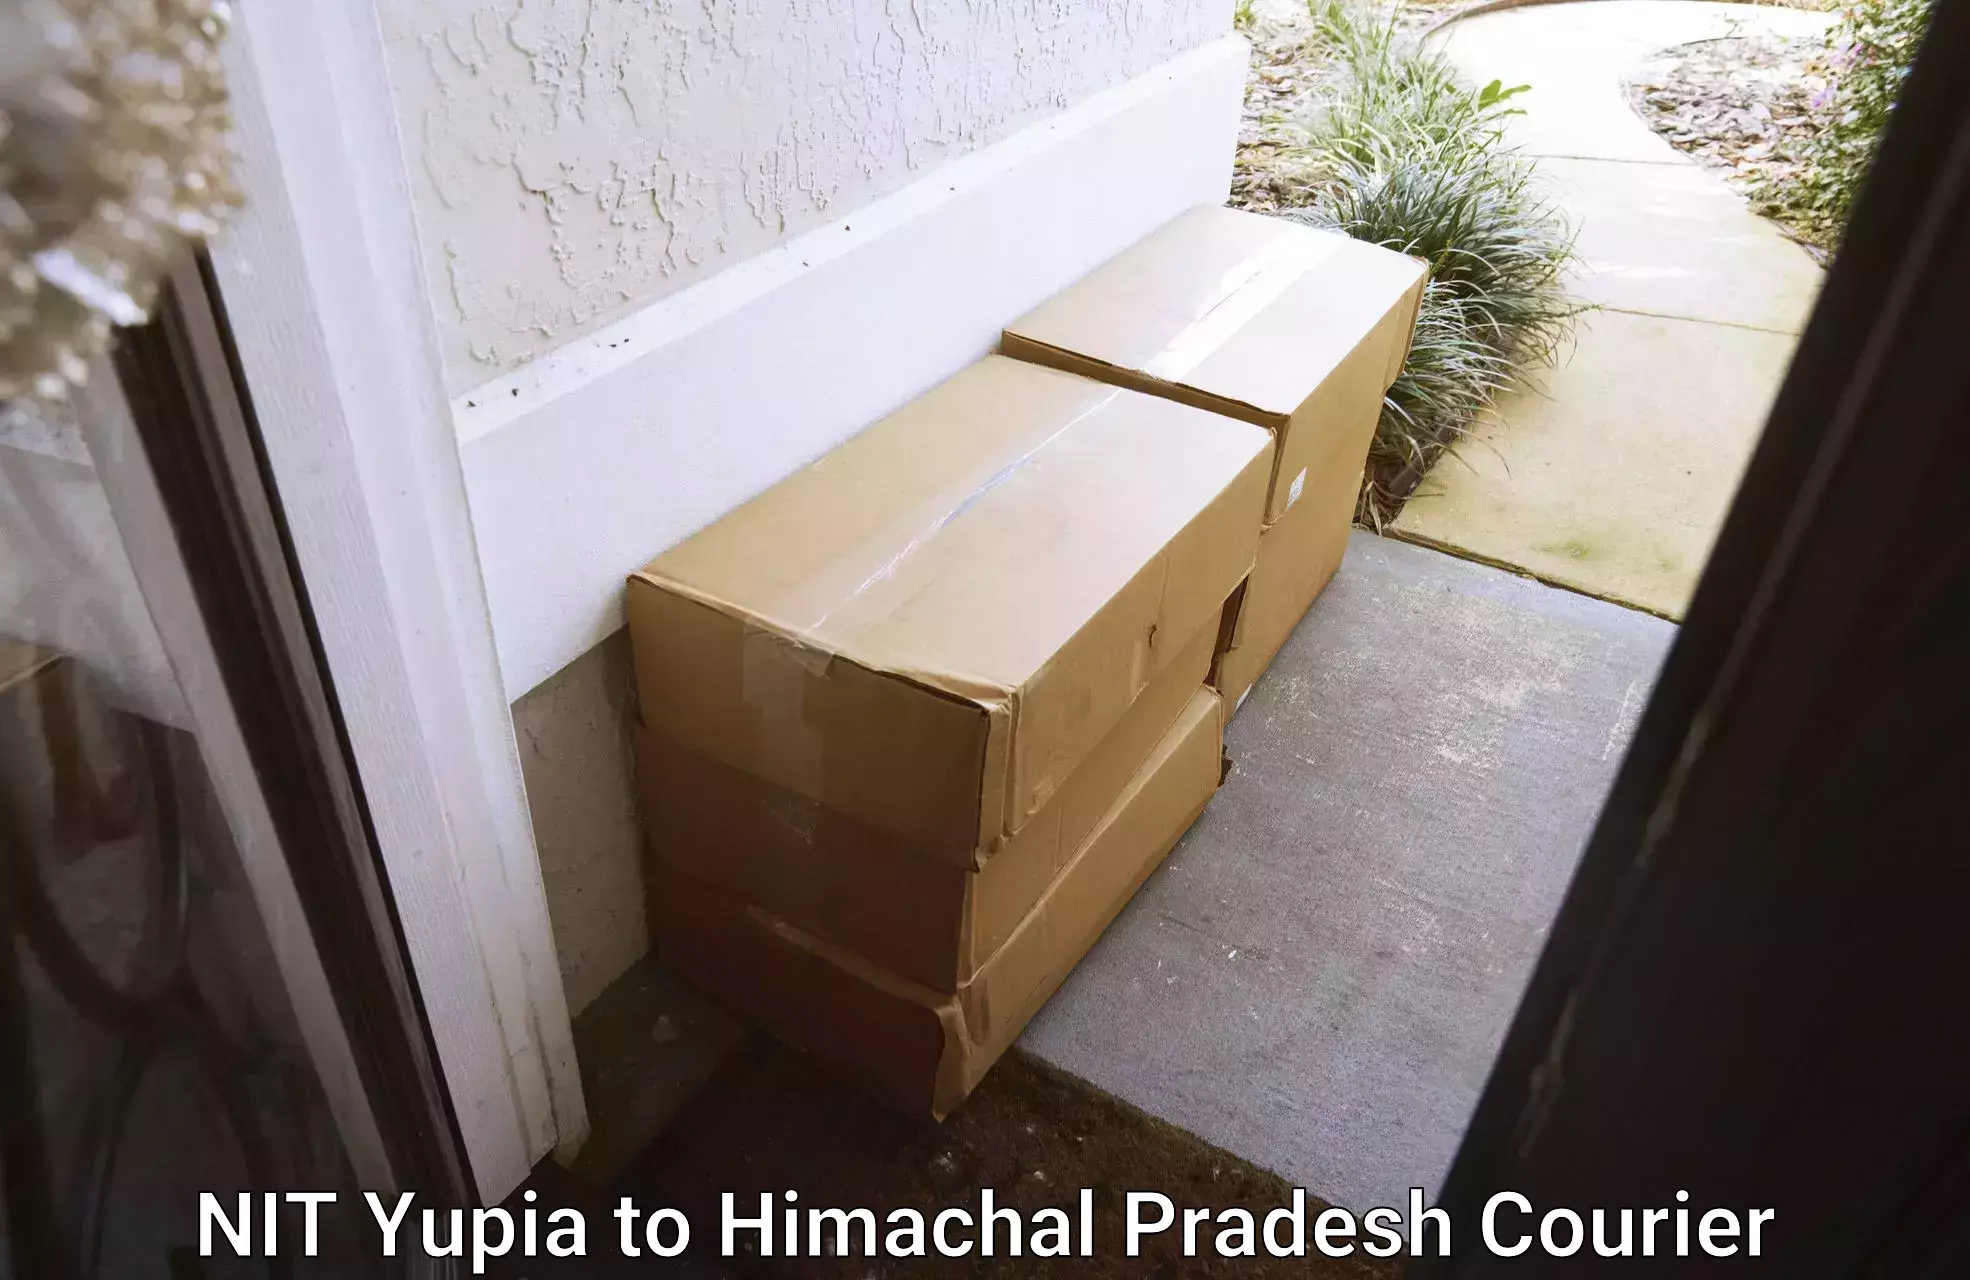 Urgent courier needs NIT Yupia to Lahaul and Spiti